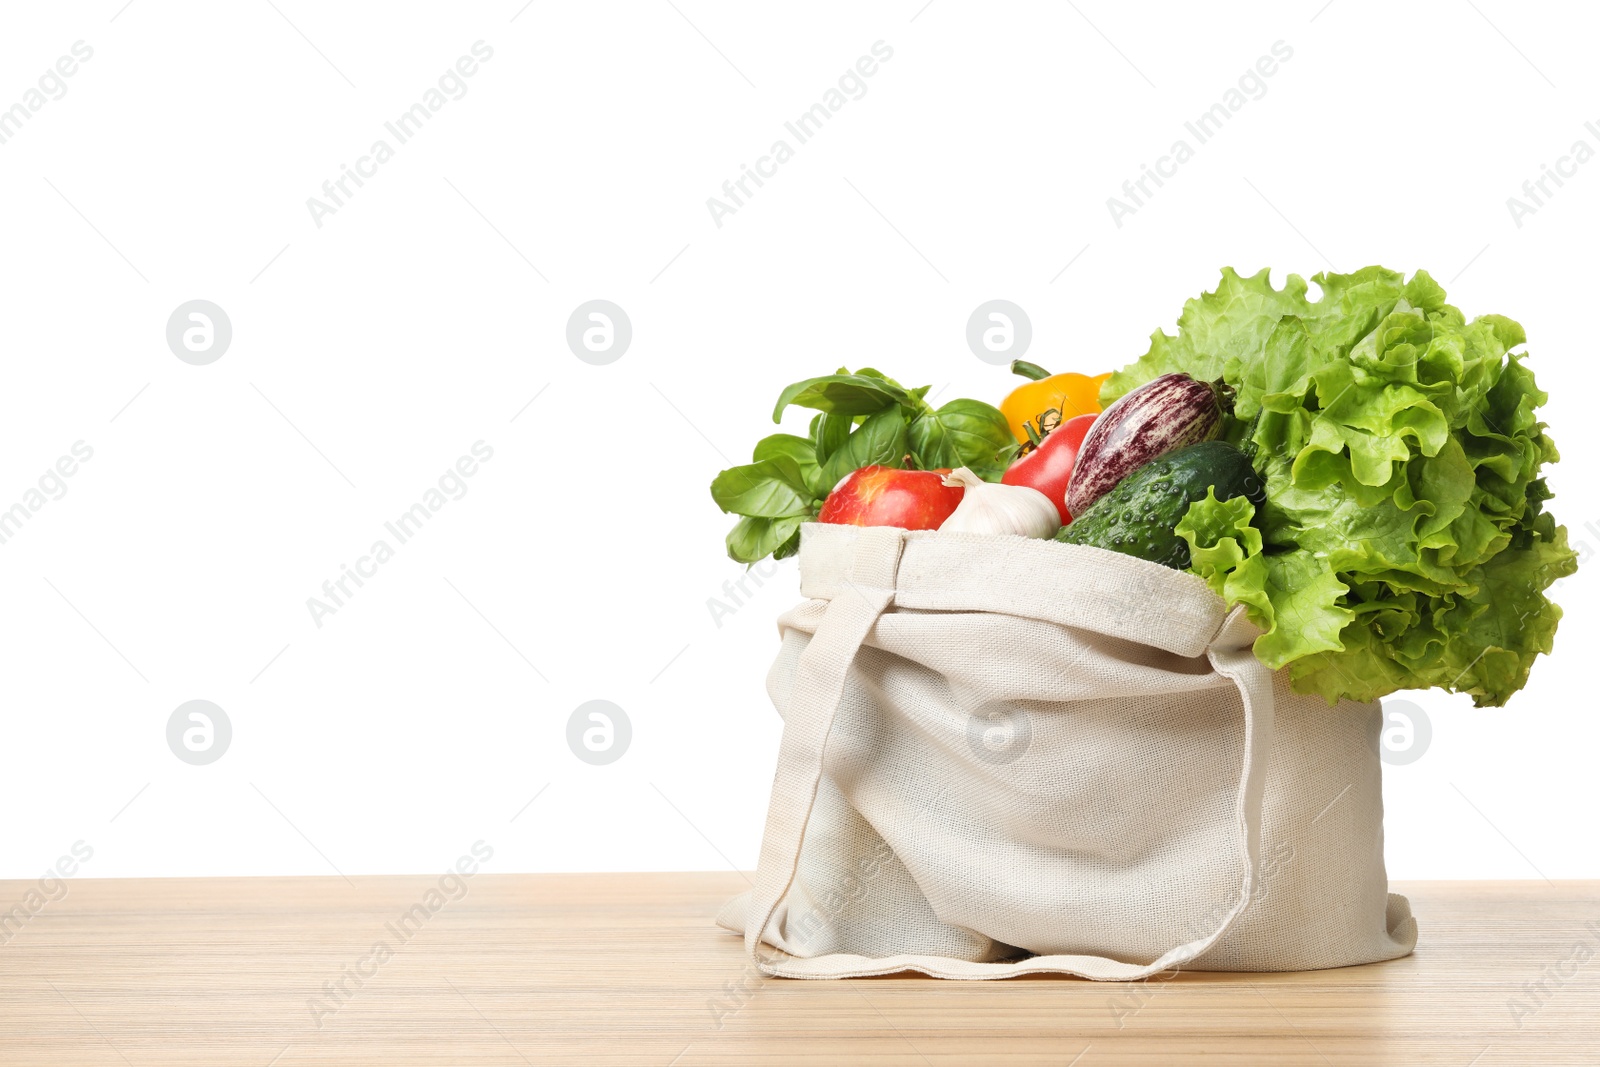 Photo of Cloth bag with vegetables on table against white background. Space for text